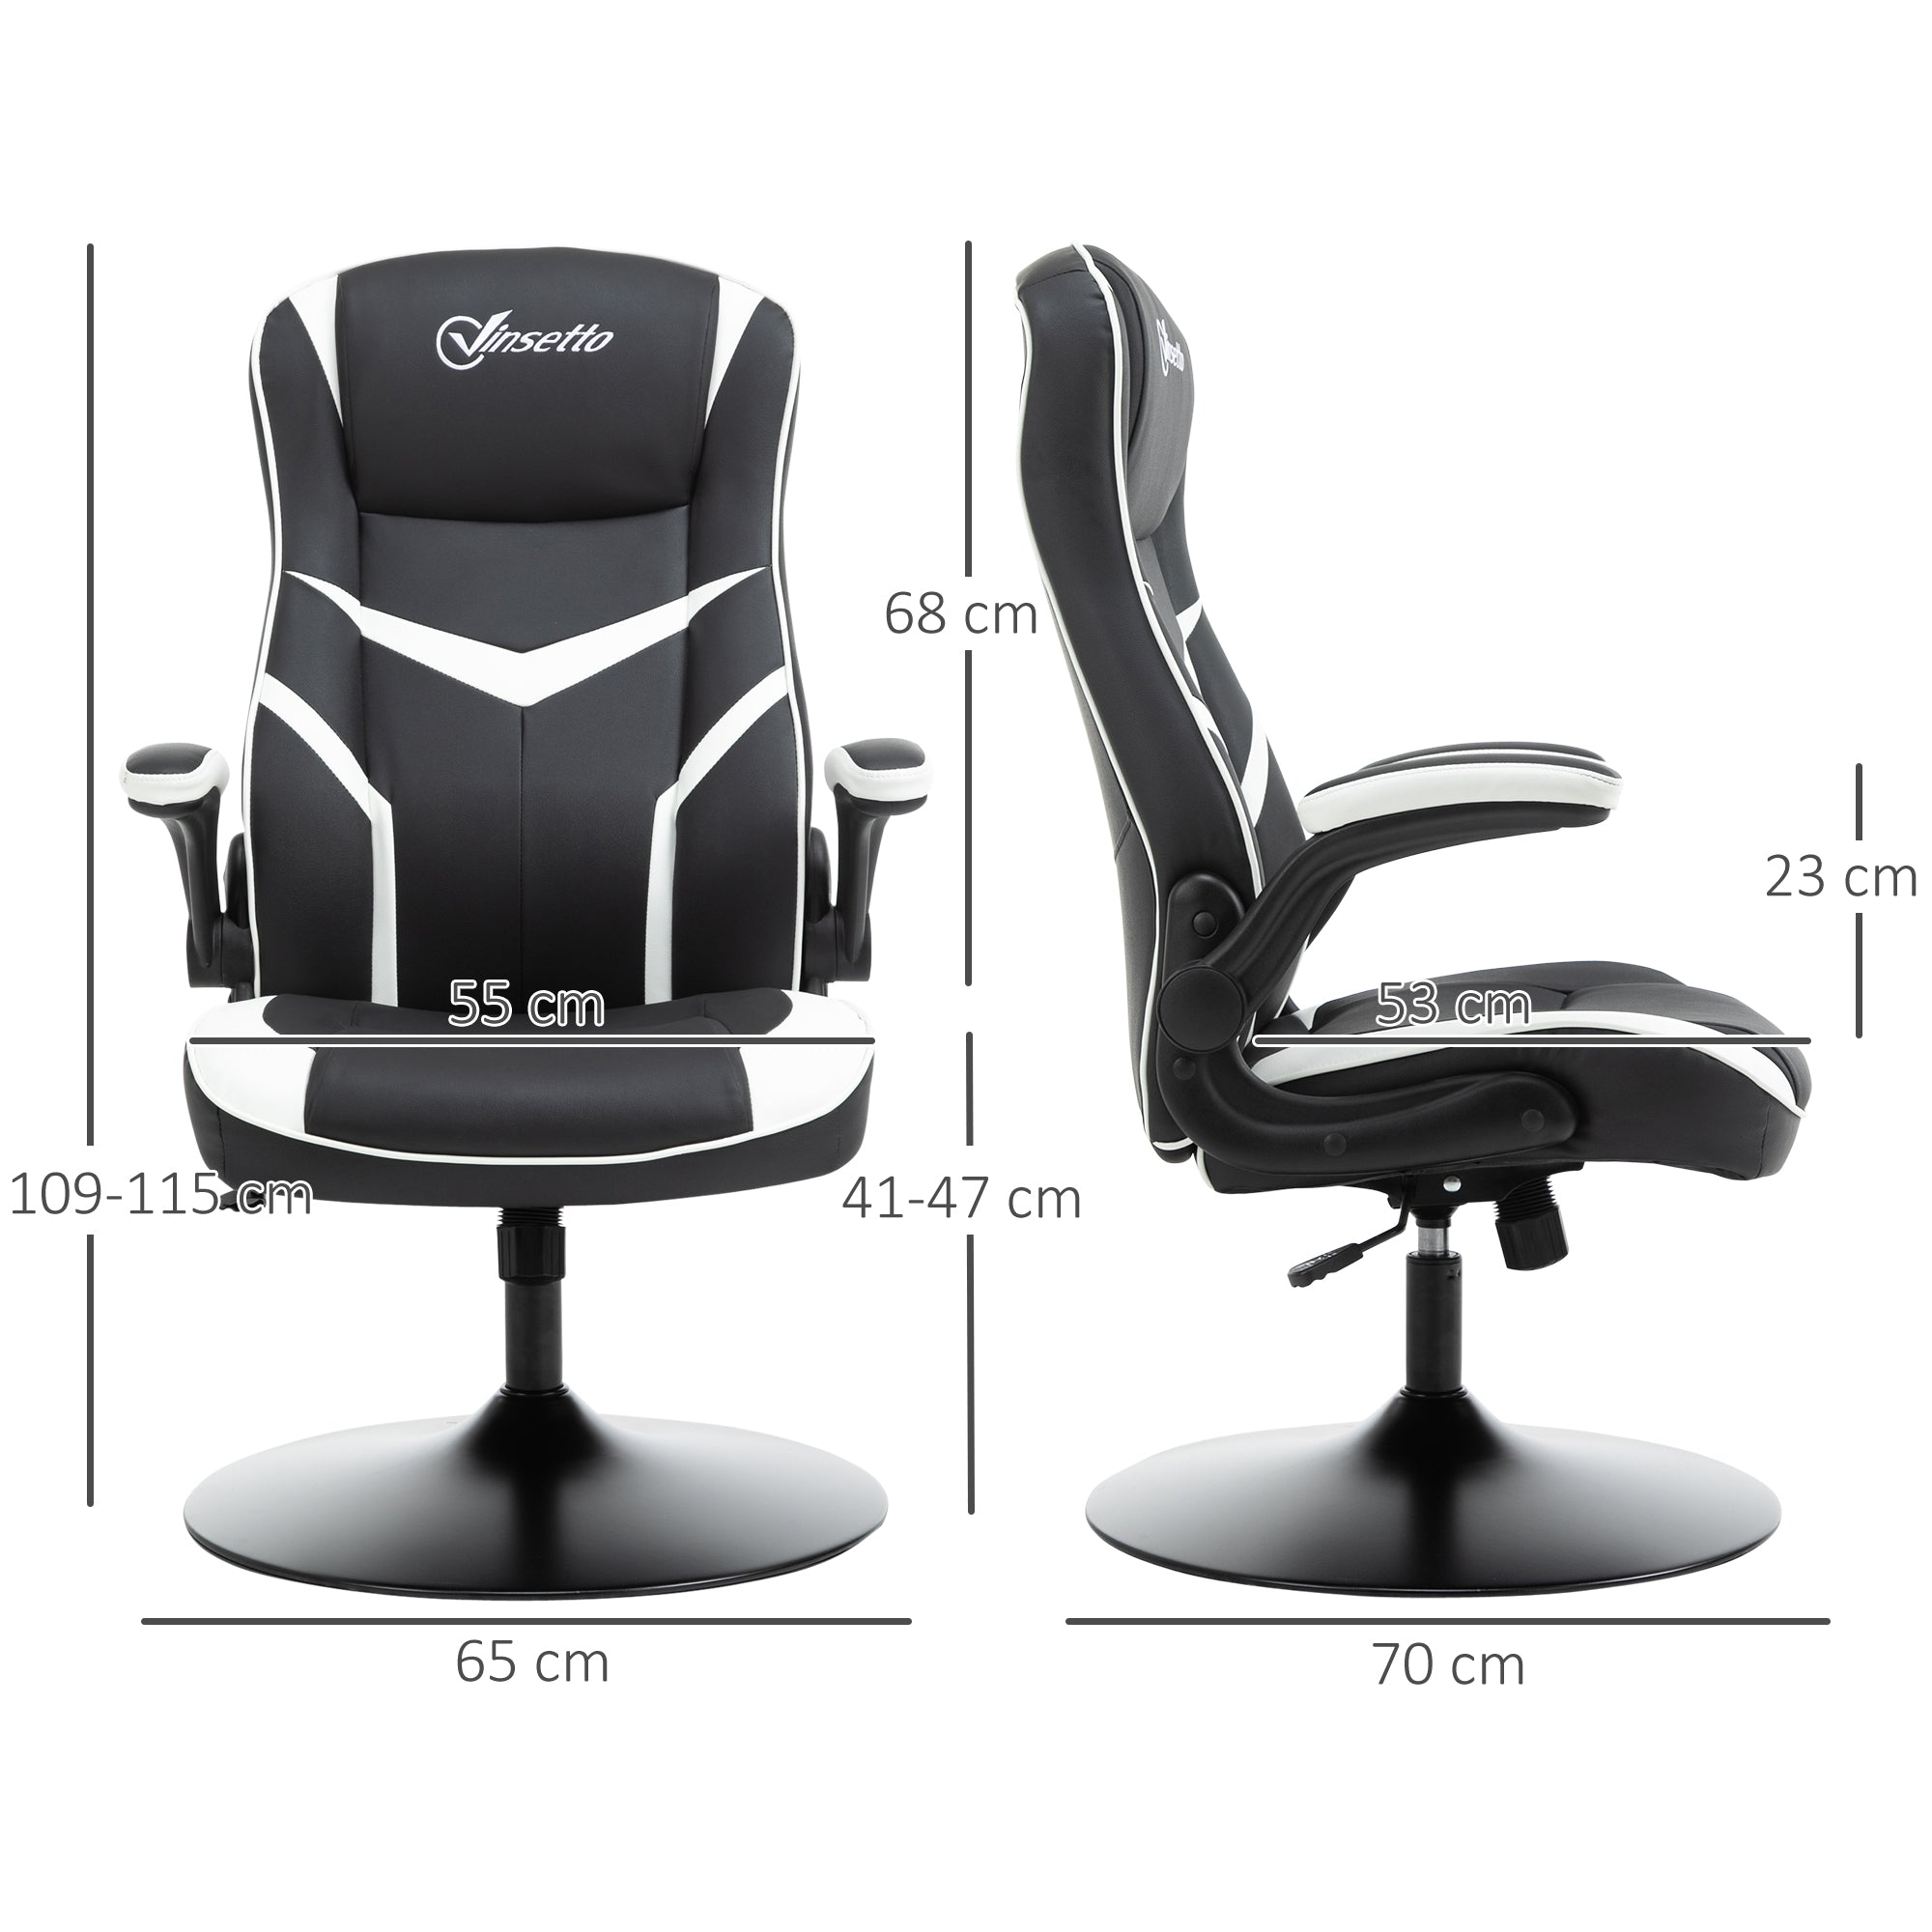 Gaming Chair Ergonomic Computer Chair Home Office Desk Swivel Chair w/ Adjustable Height Pedestal Base PVC Leather, Black & White-2